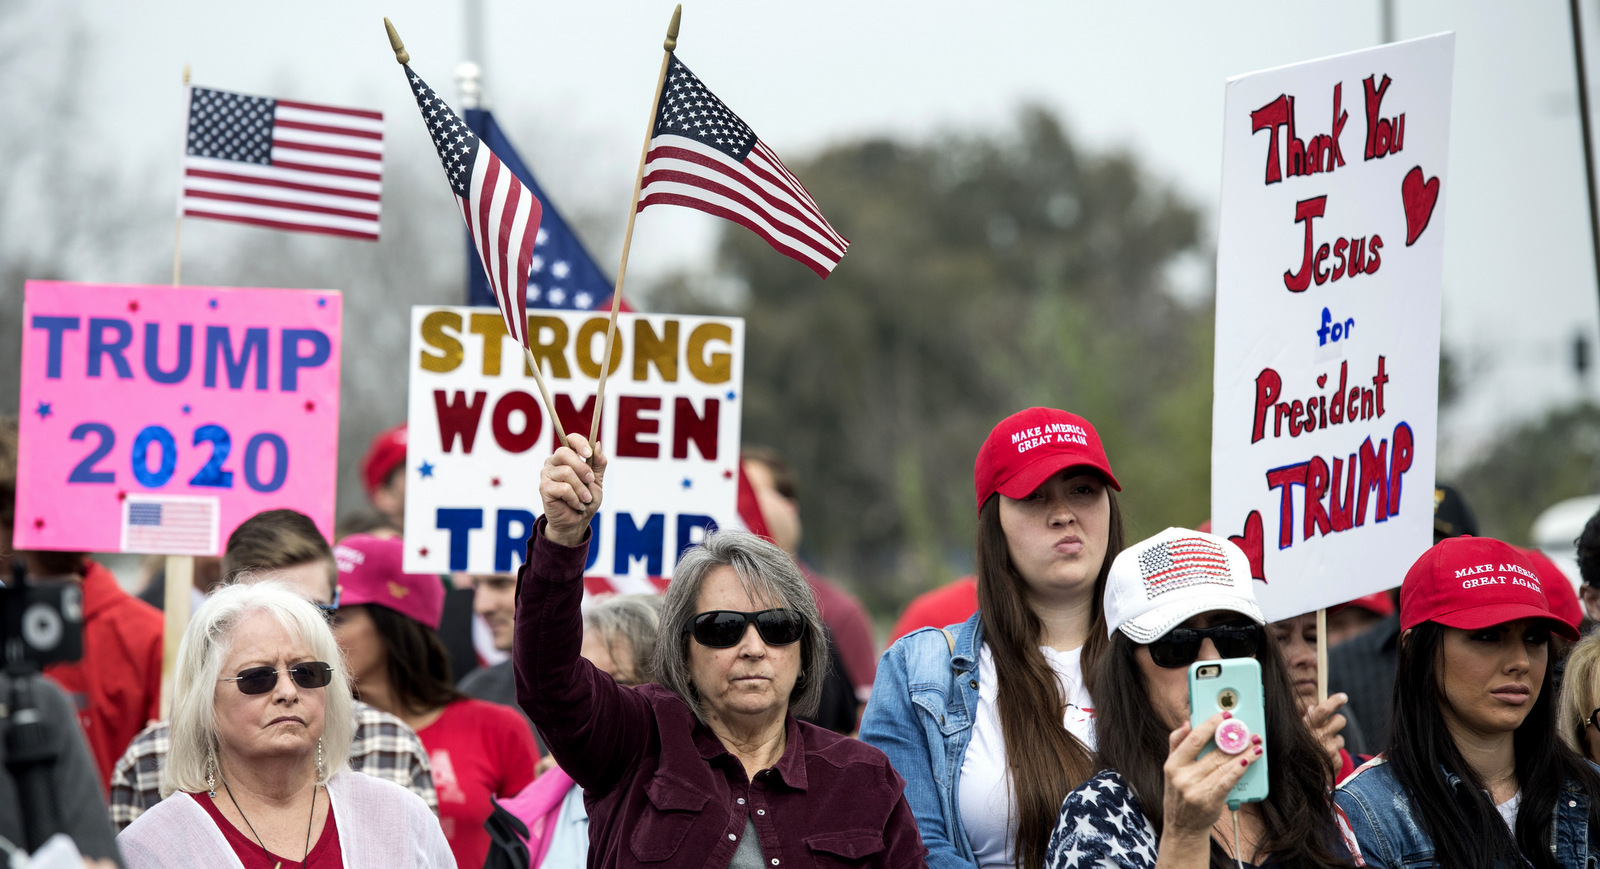 Supporters of President Trump gather for a rally Tuesday, March 13, 2018, in San Diego. (AP Photo/Kyusung Gong)